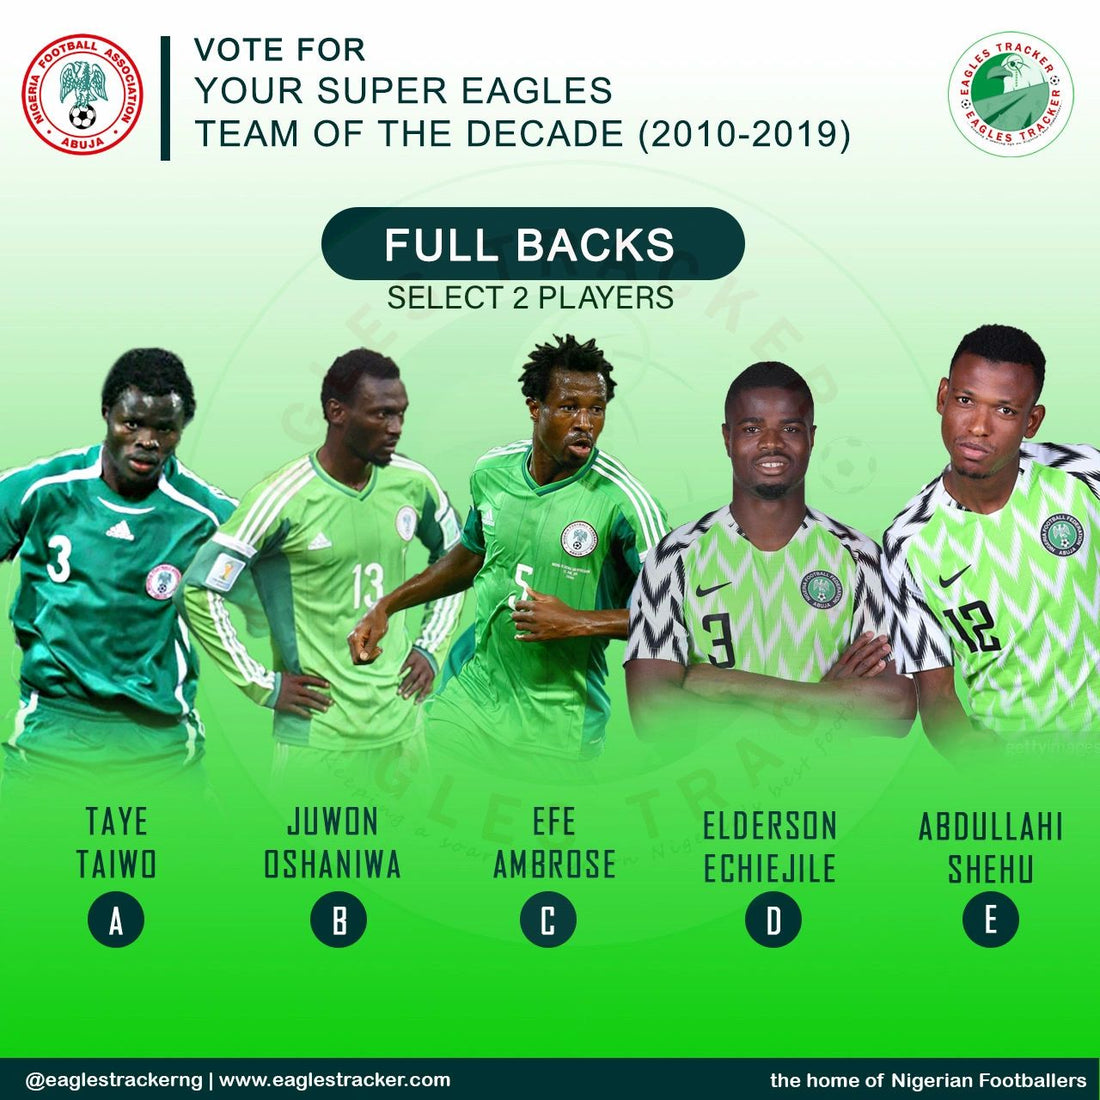 VOTE FOR YOUR SUPER EAGLES TEAM OF THE DECADE (FULL BACKS)